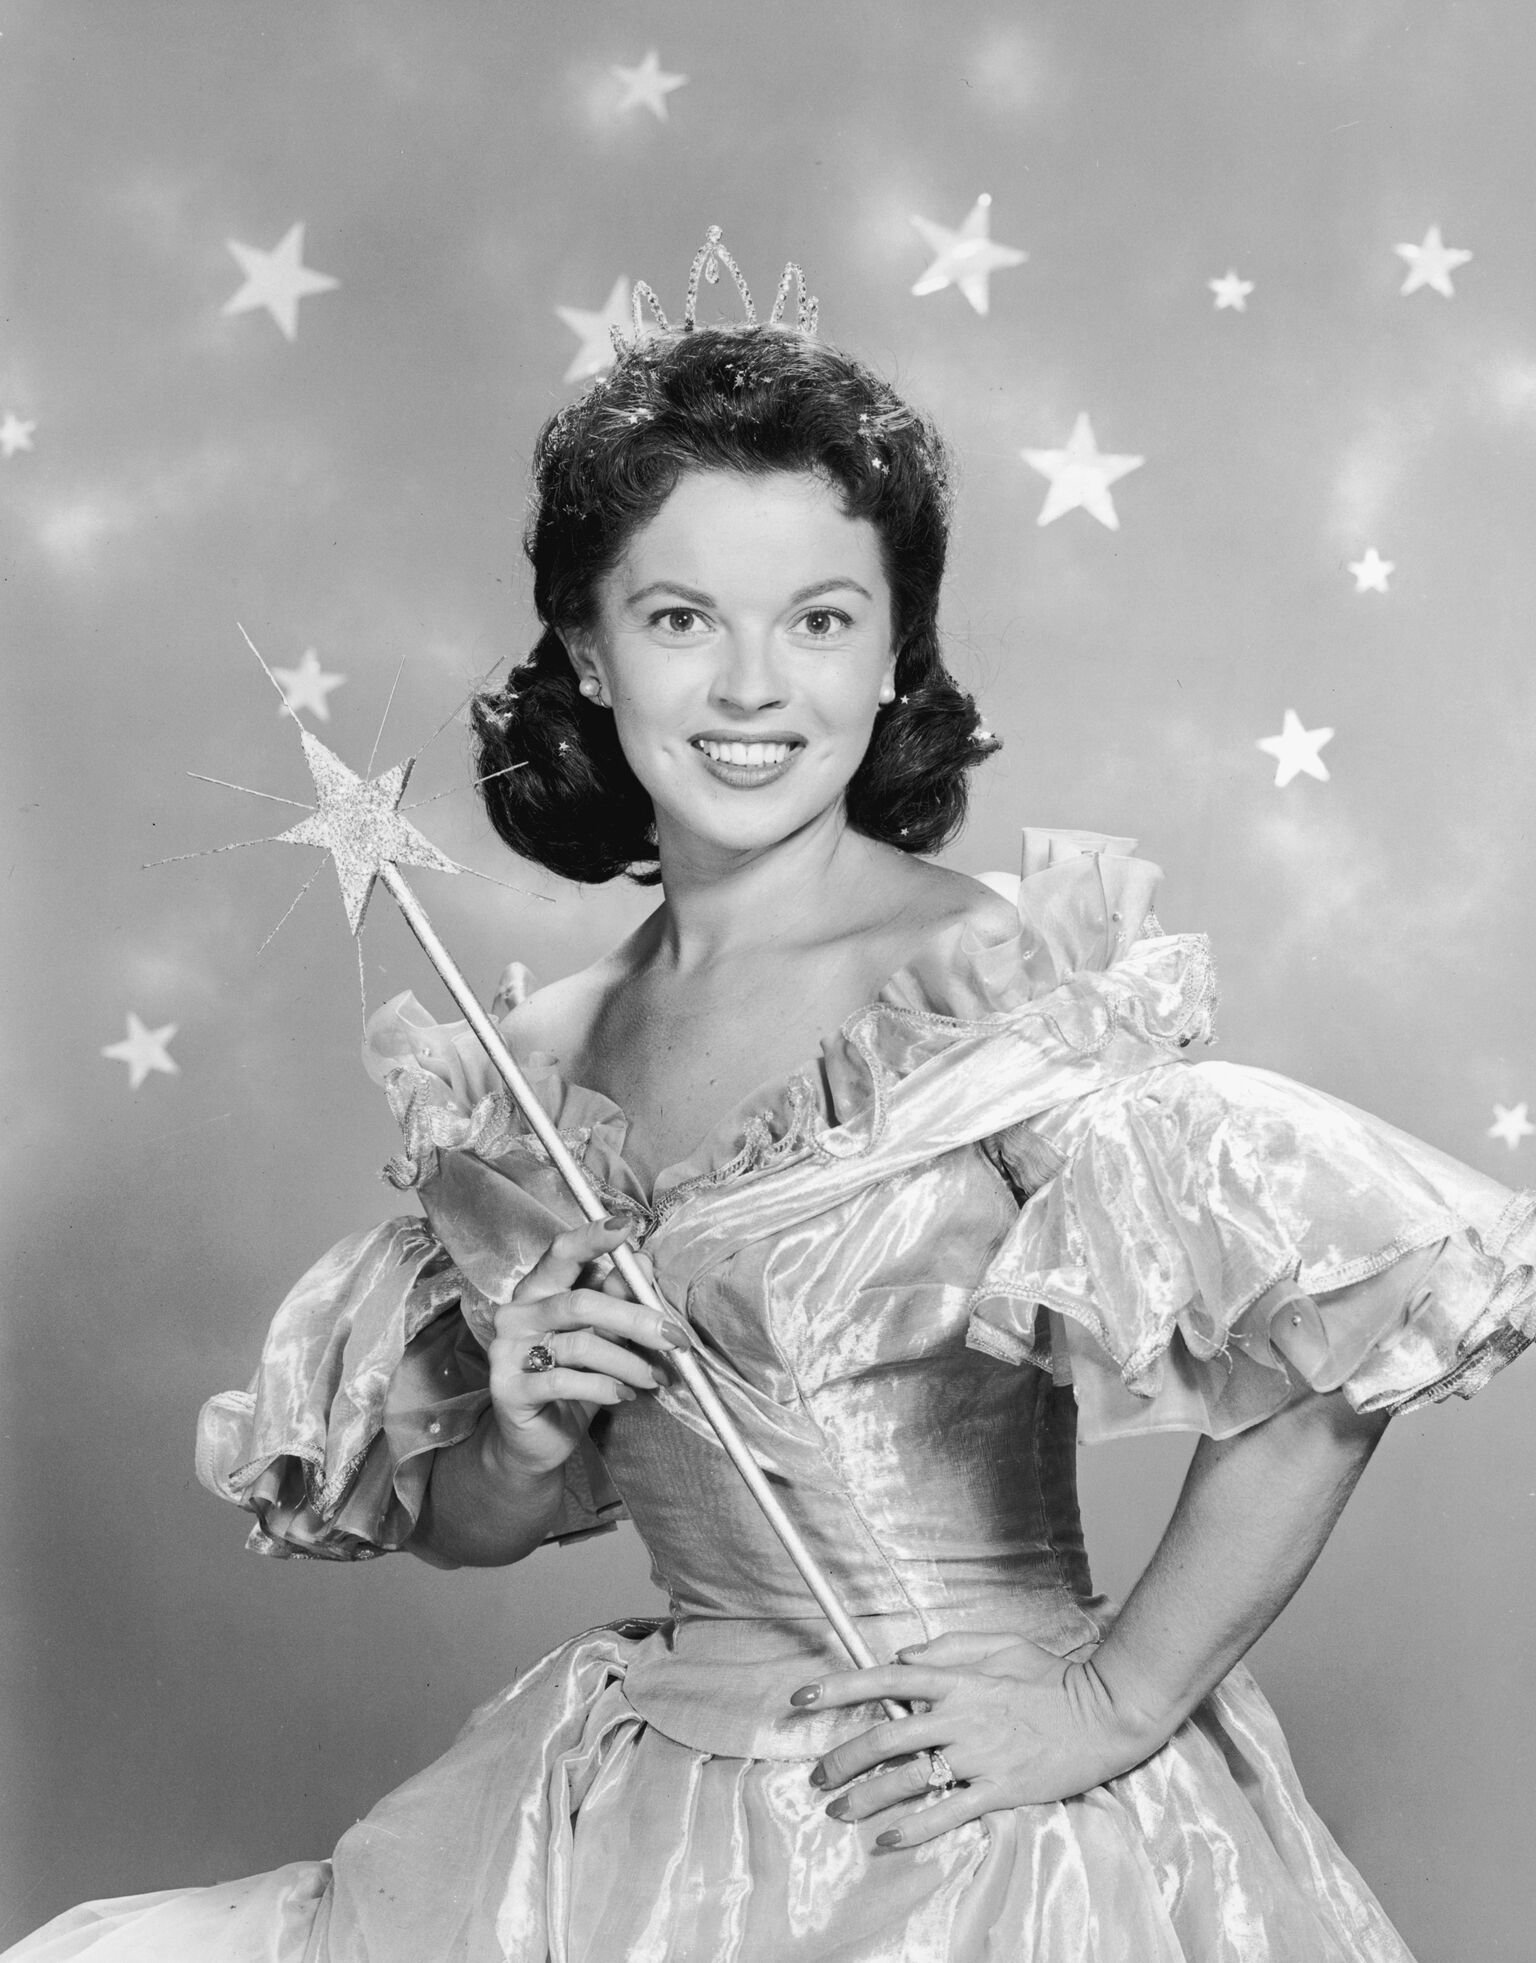  American actor Shirley Temple wears a fairy godmother costume, which includes a magic wand and a tiara, in a promotional portrait for her television series of dramatized fairy tales, 'Shirley Temple's Storybook' circa 1958 | Photo: Getty Images